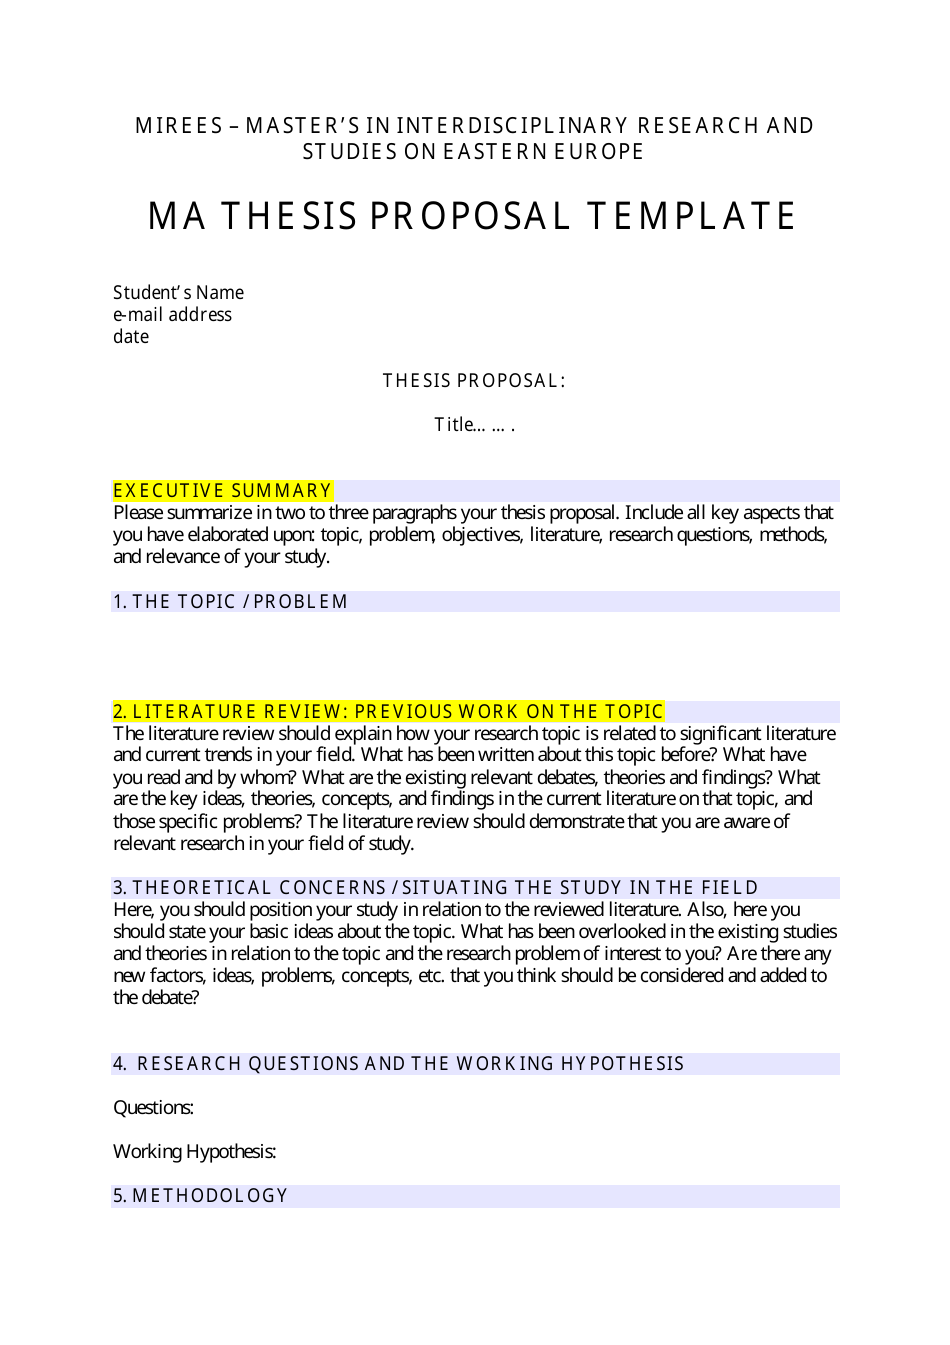 Ma Thesis Proposal Template on Interdisciplinary Research and Studies on Eastern Europe at Universita Di Bologna